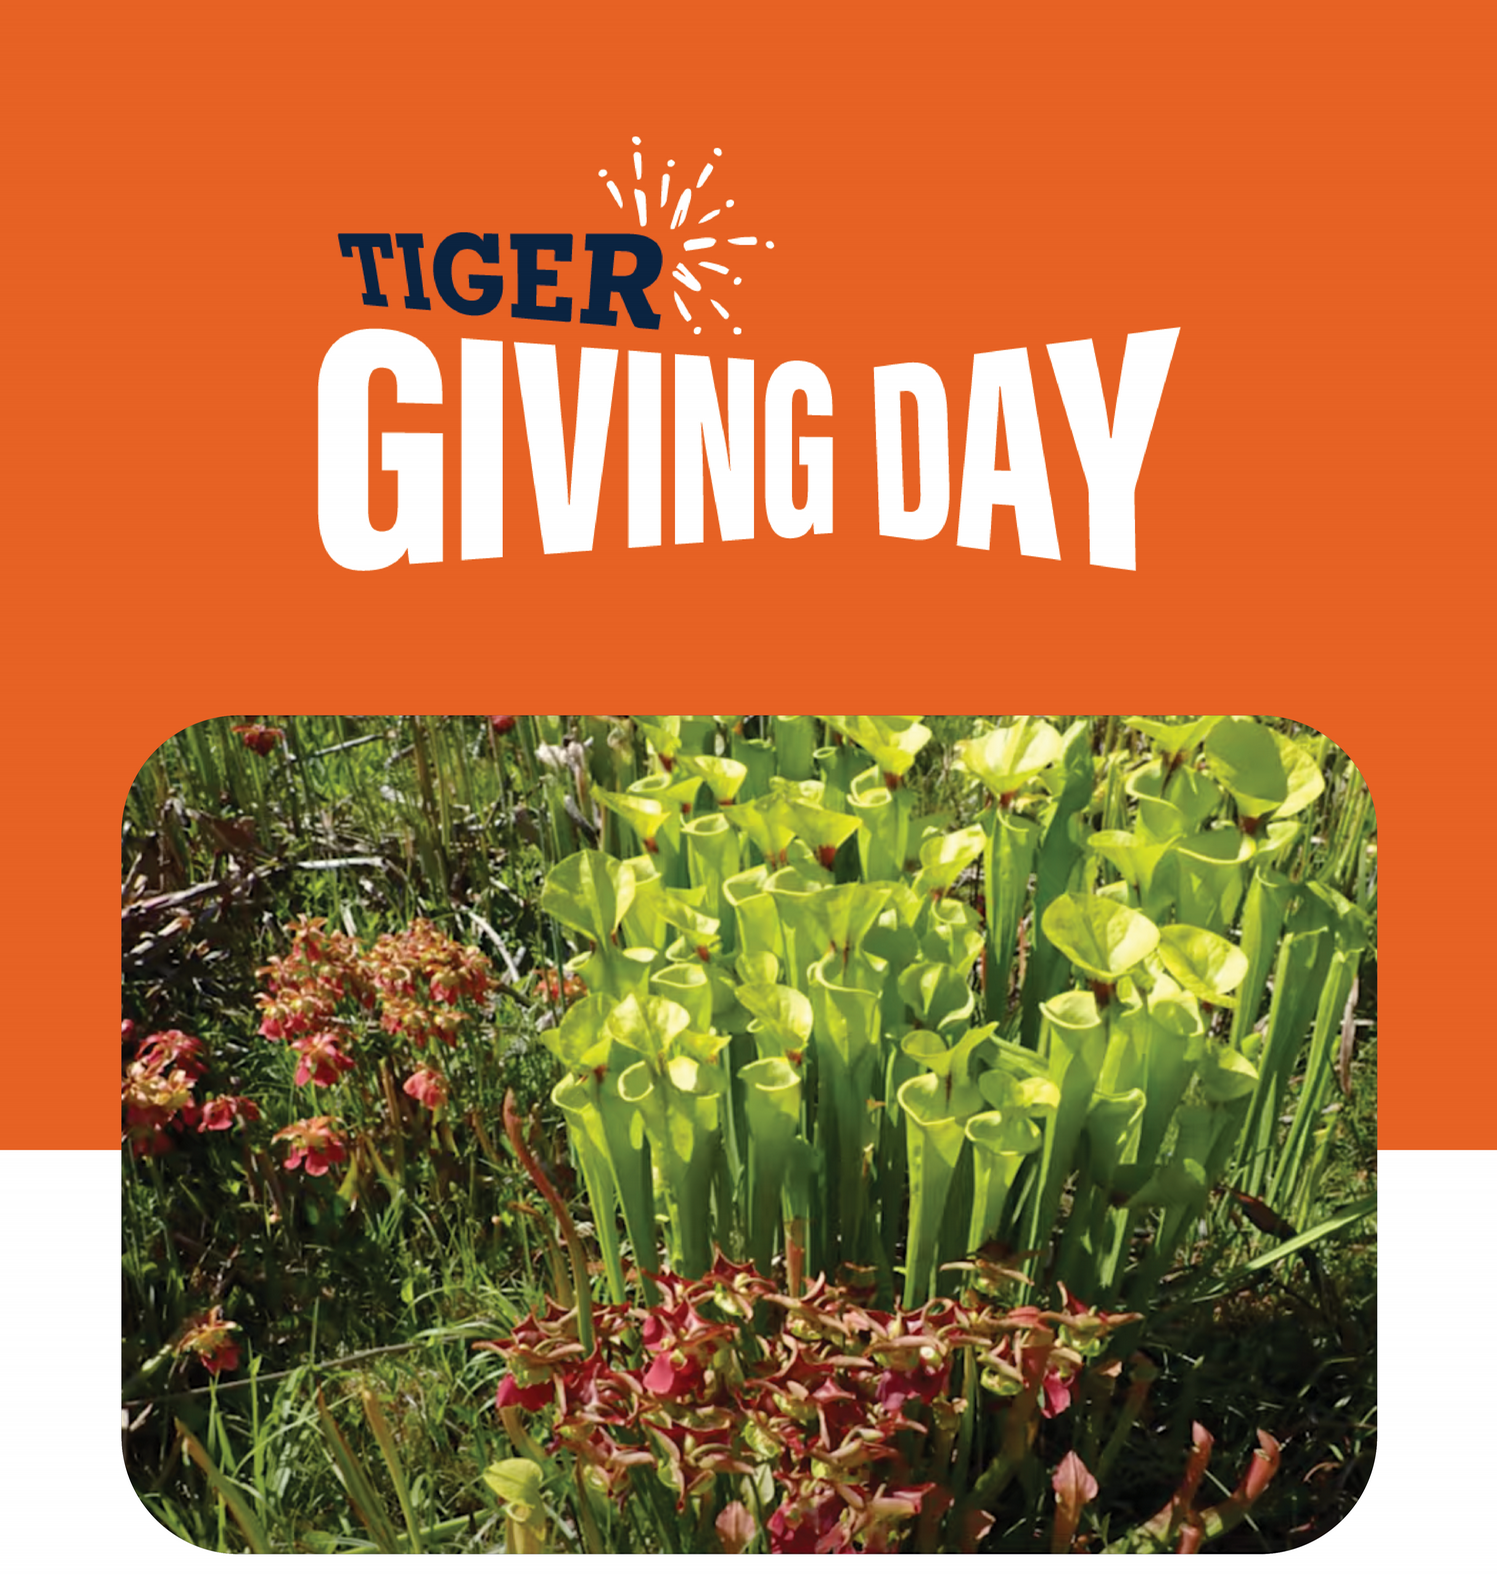 Tiger Giving Day: Help our Arboretum’s carnivorous bog exhibit and create an accessible boardwalk